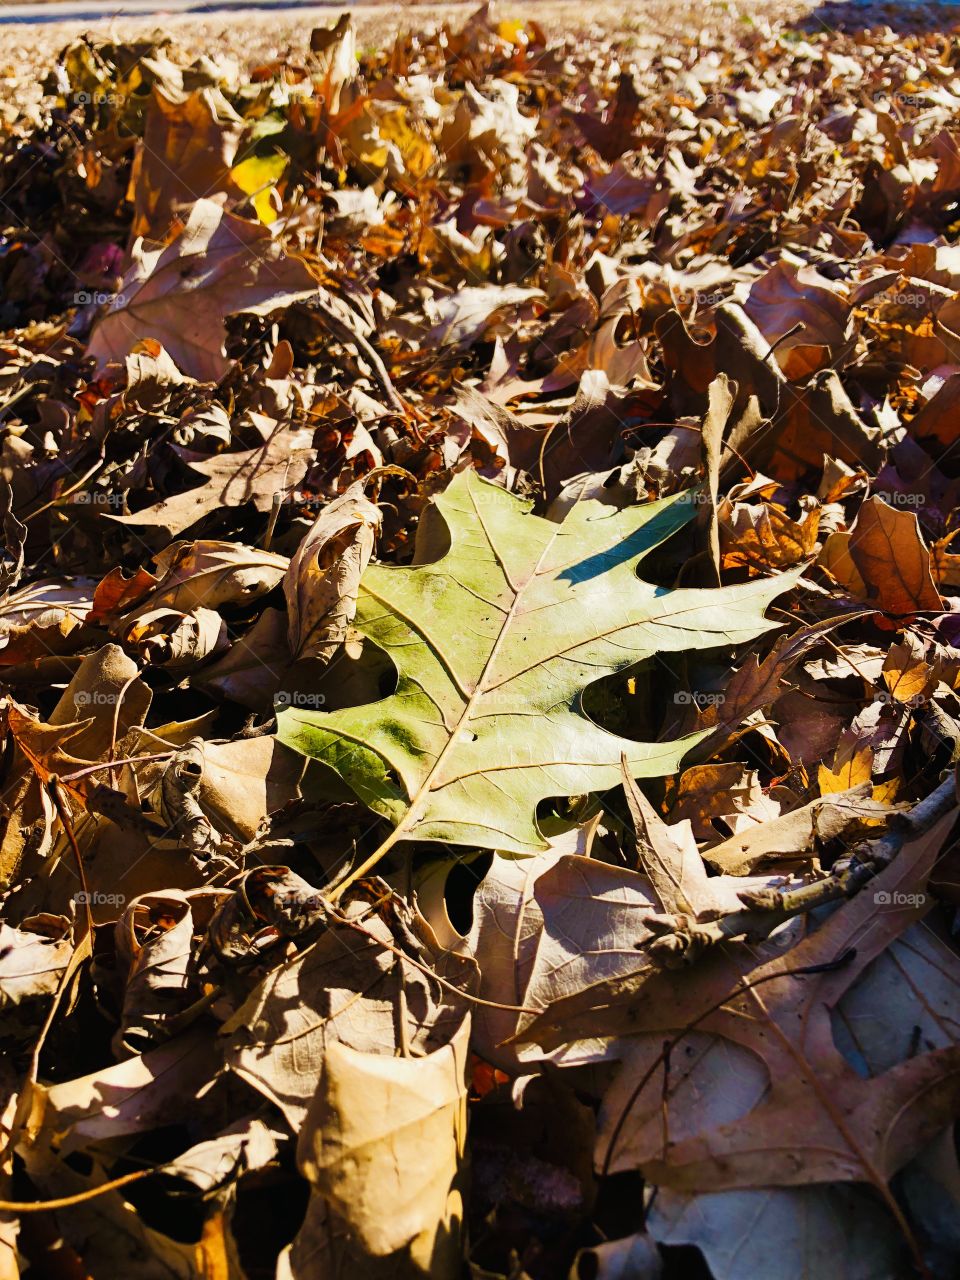 One green leaf stands out in the many golden brown ones